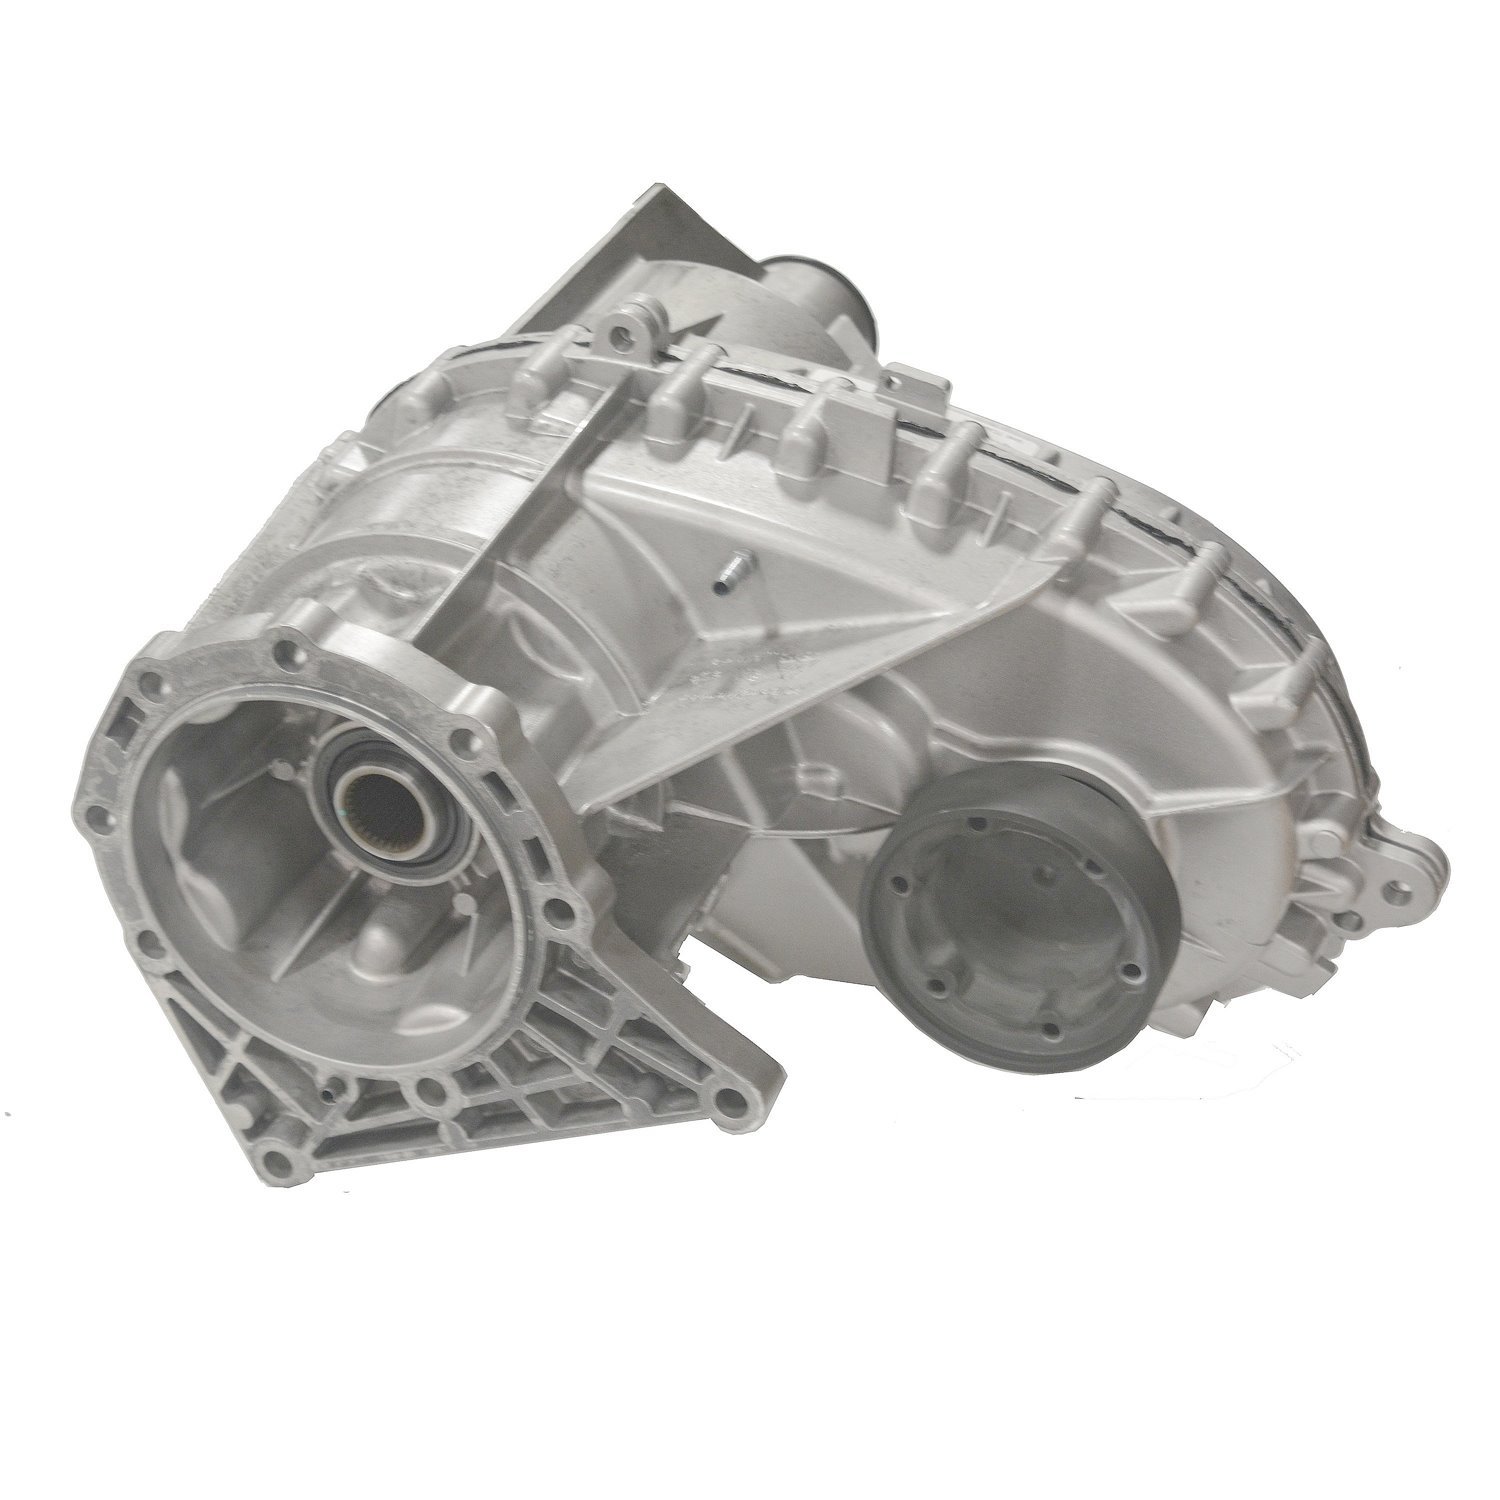 Remanufactured BW4417 Transfer Case for Ford 07-14